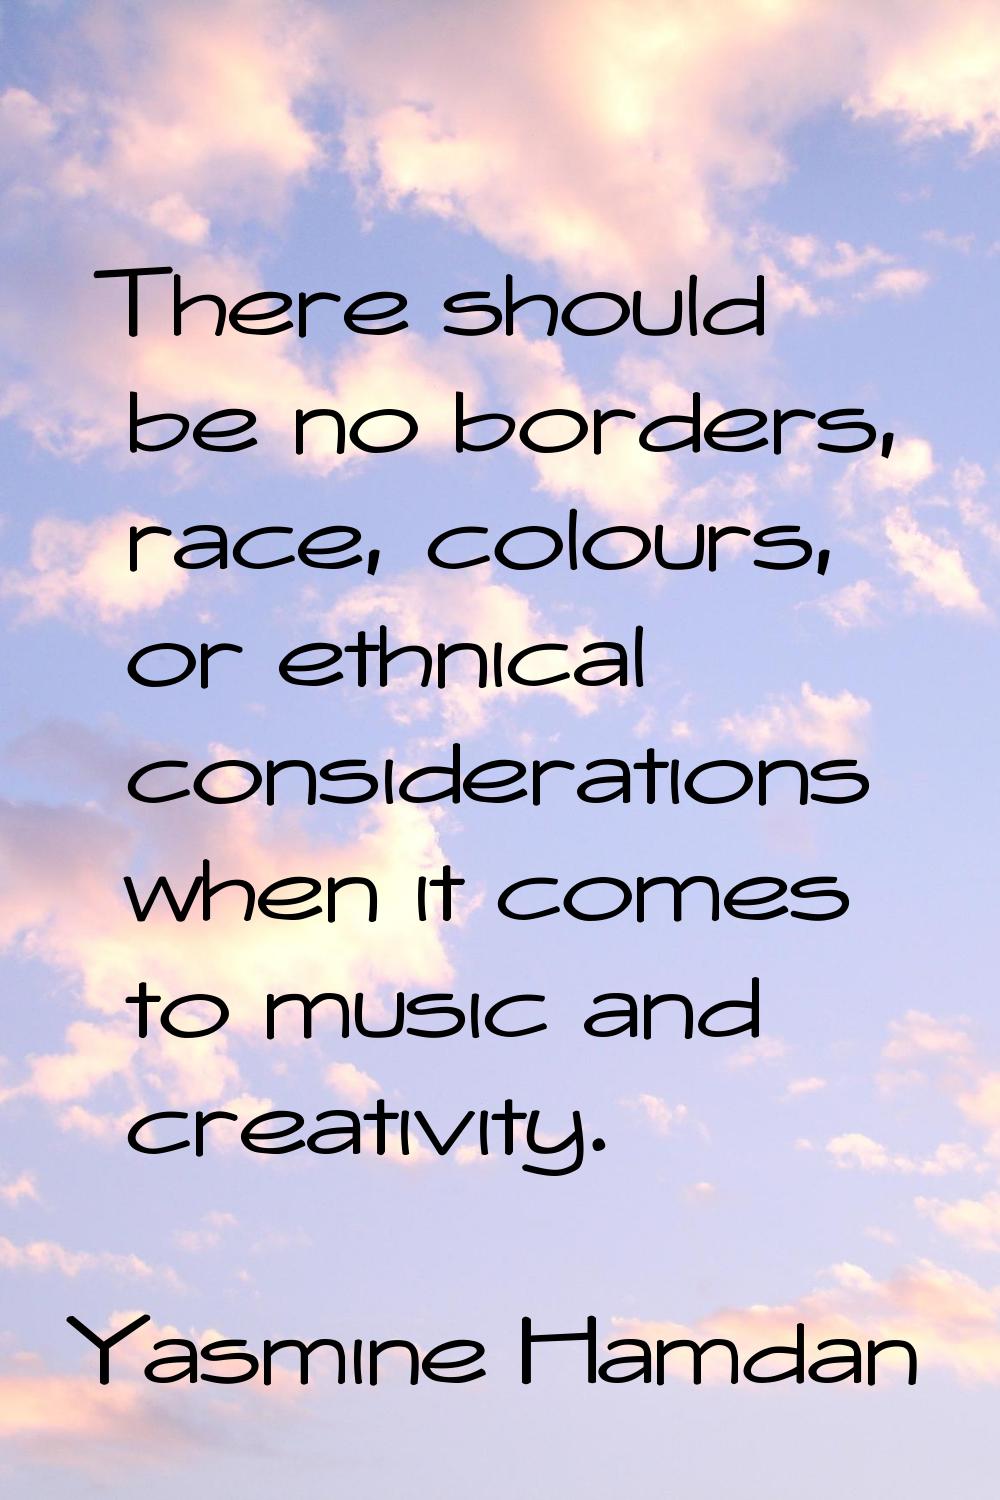 There should be no borders, race, colours, or ethnical considerations when it comes to music and cr